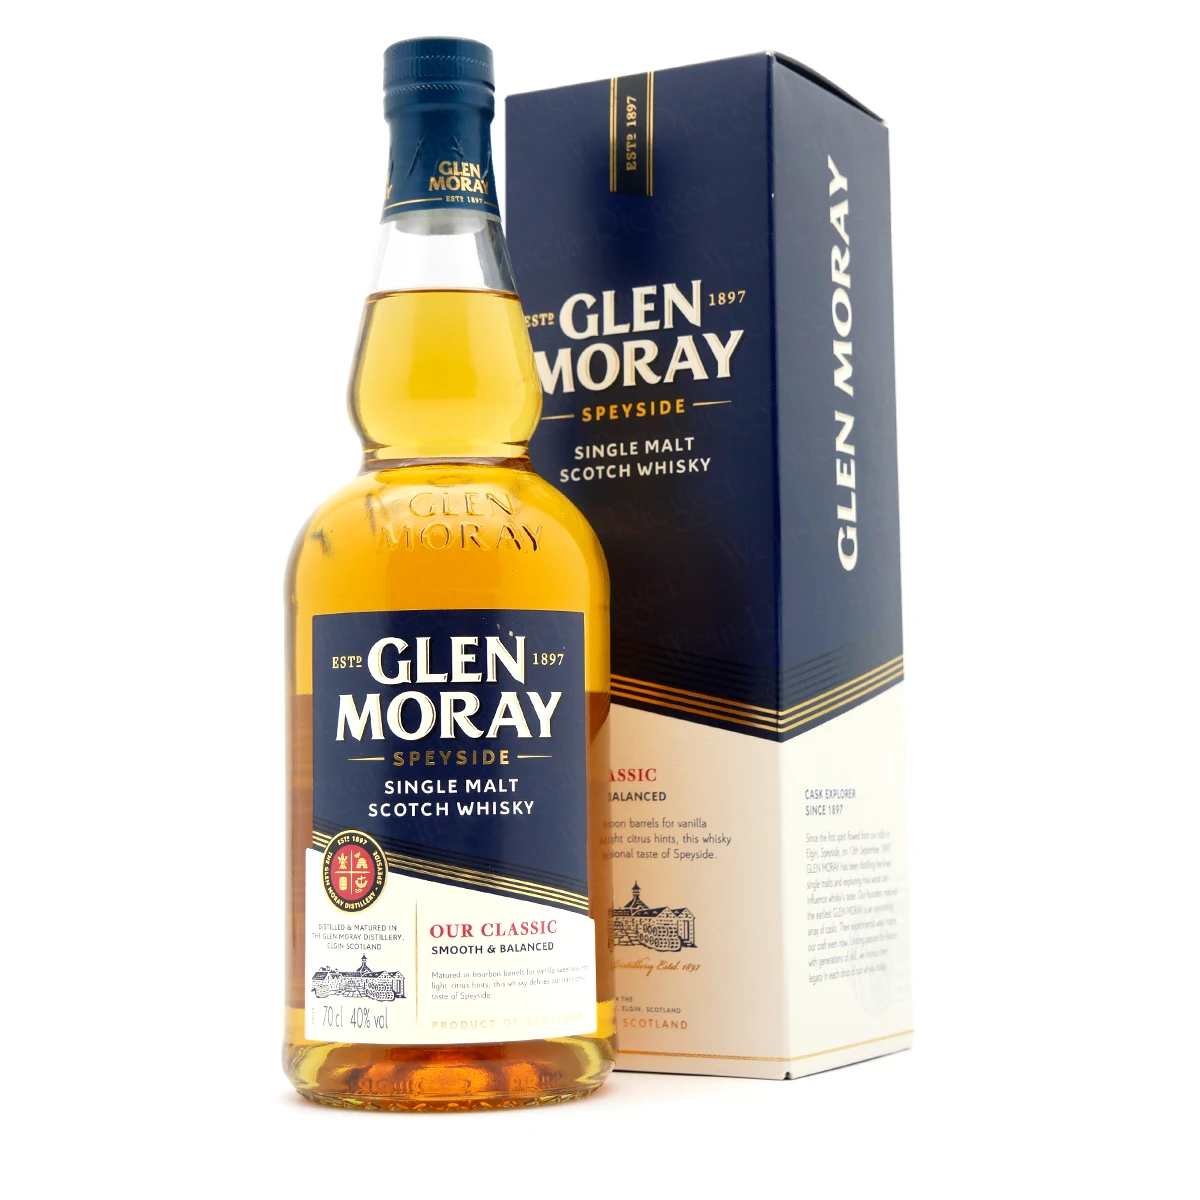 Glen Moray OUR CLASSIC